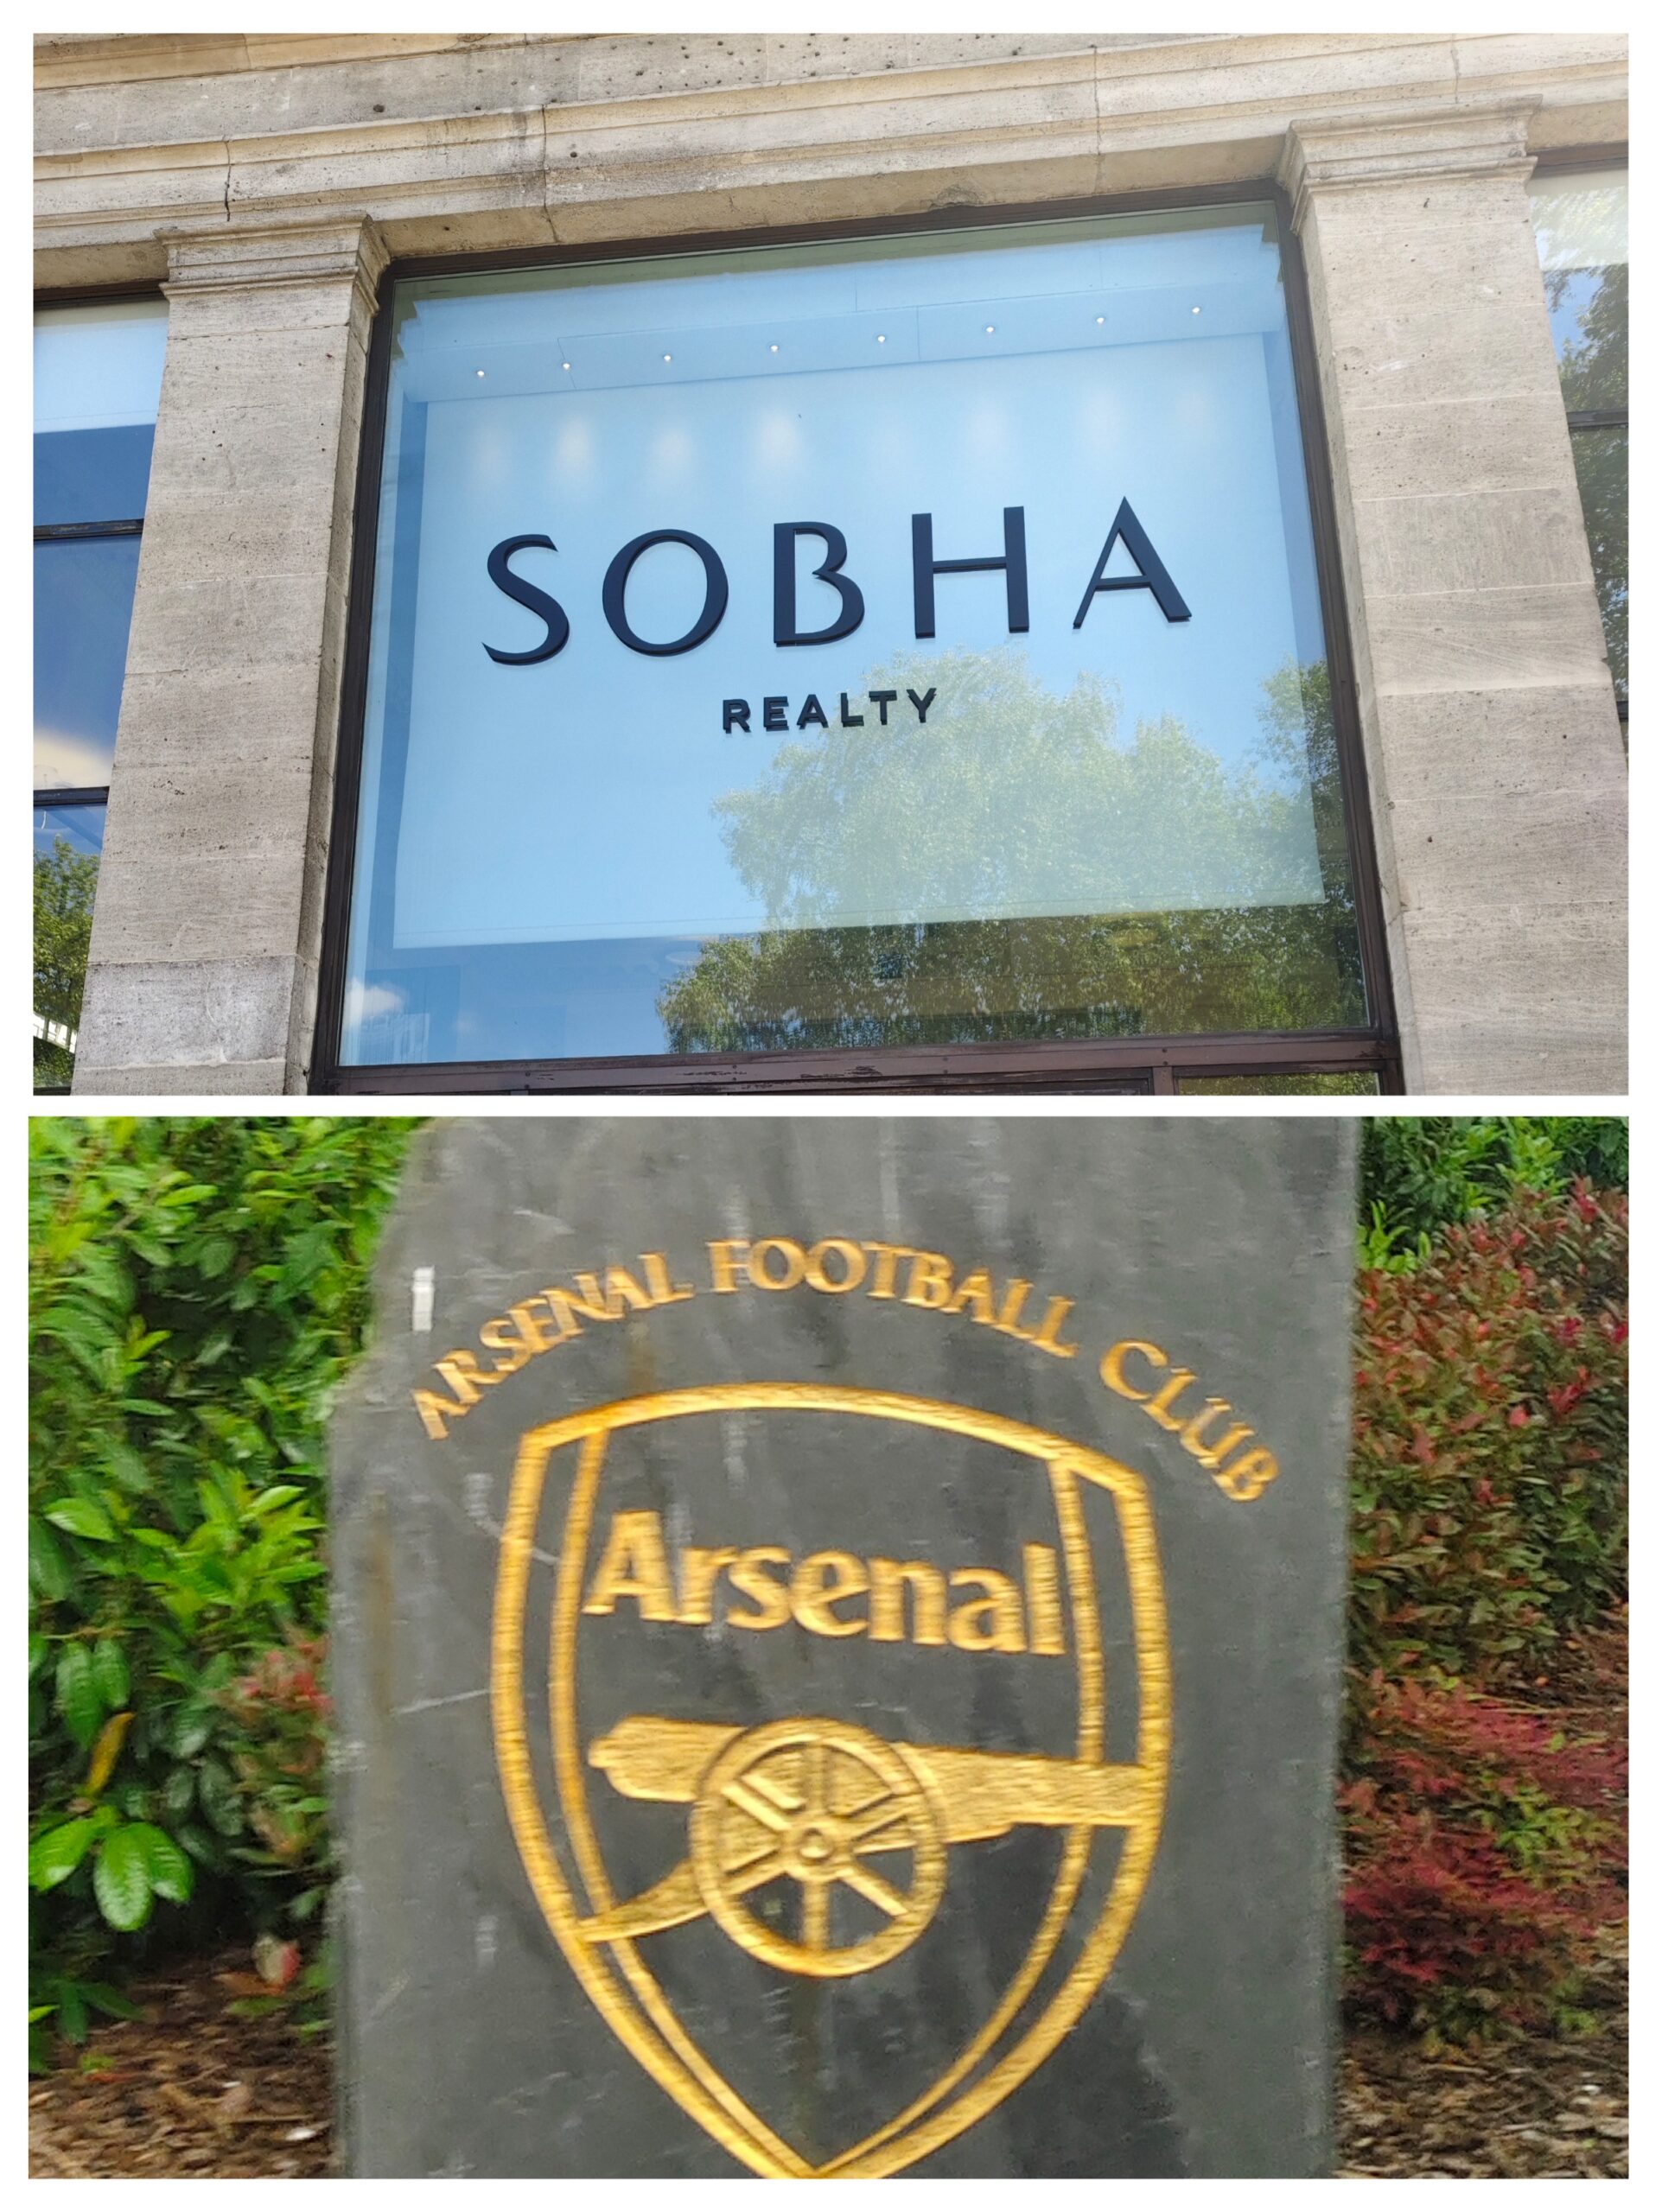 Game For Global Footprint with Football: Sobha Realty